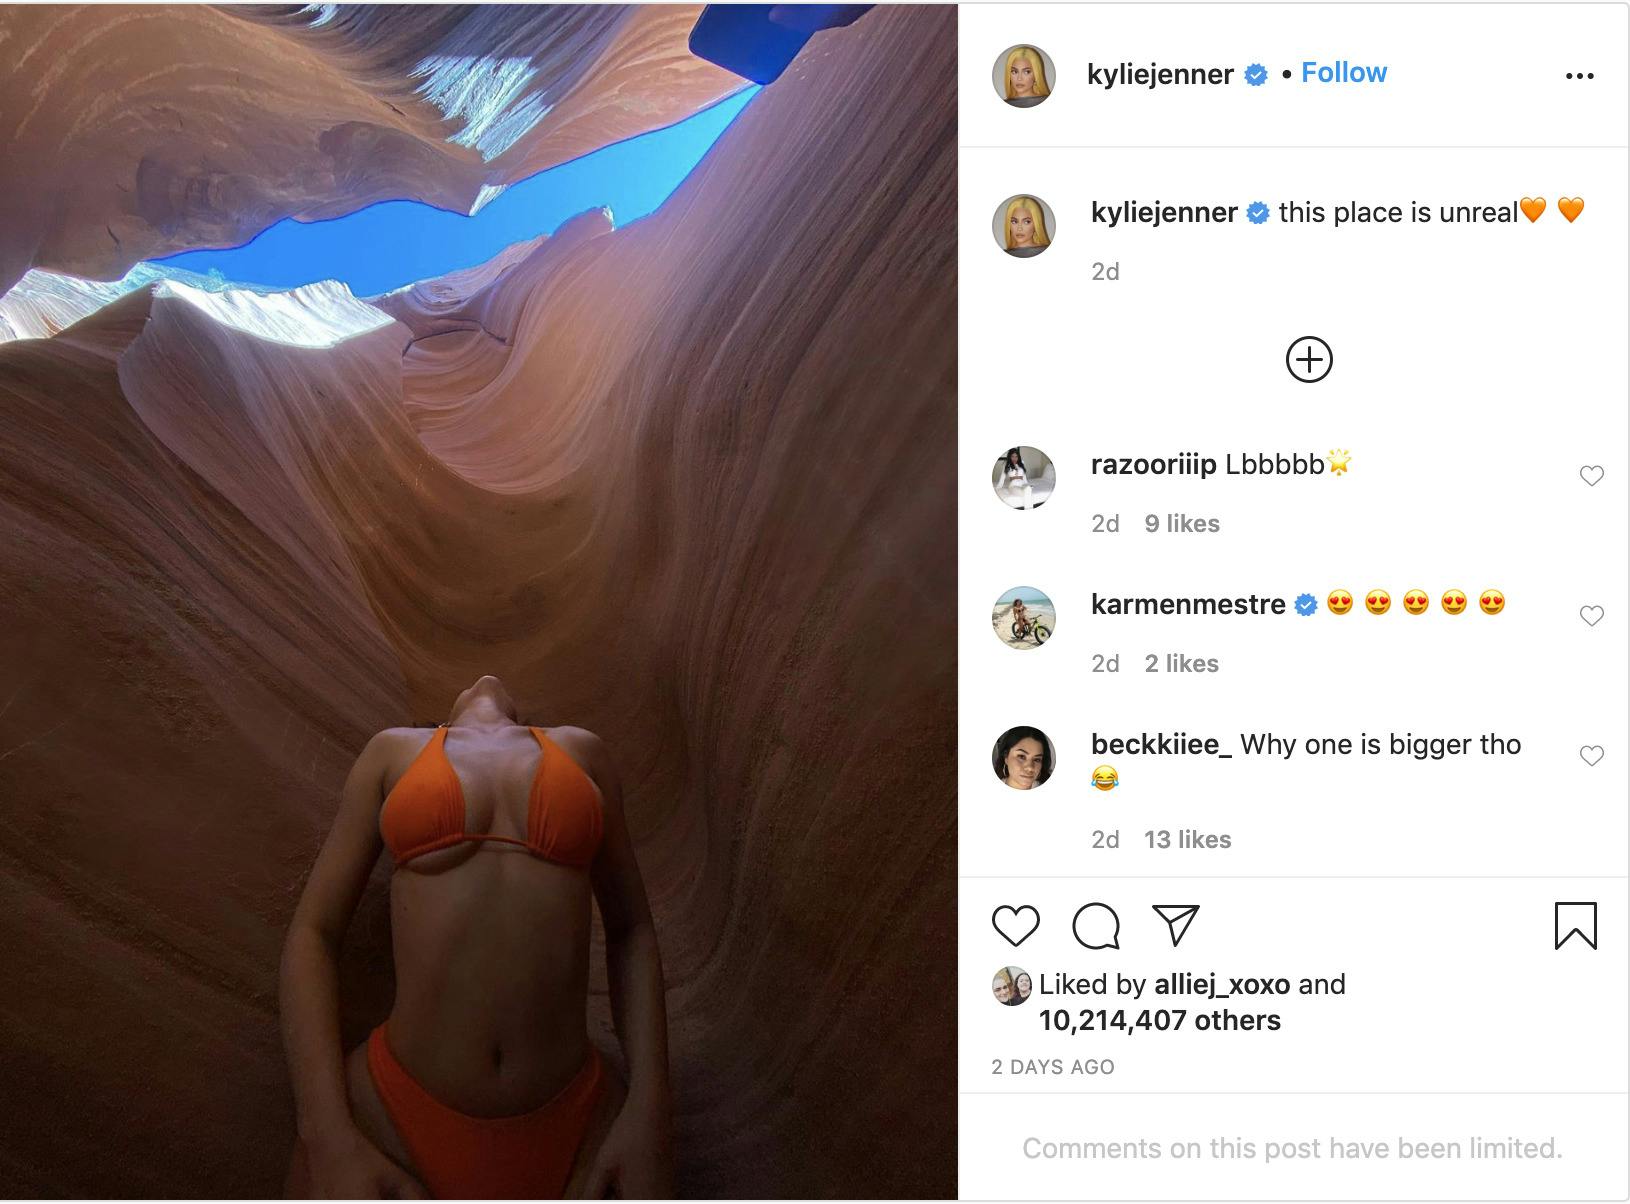 'This place is unreal' with a photo of Jenner in a bikini looking up at the opening of the canyon